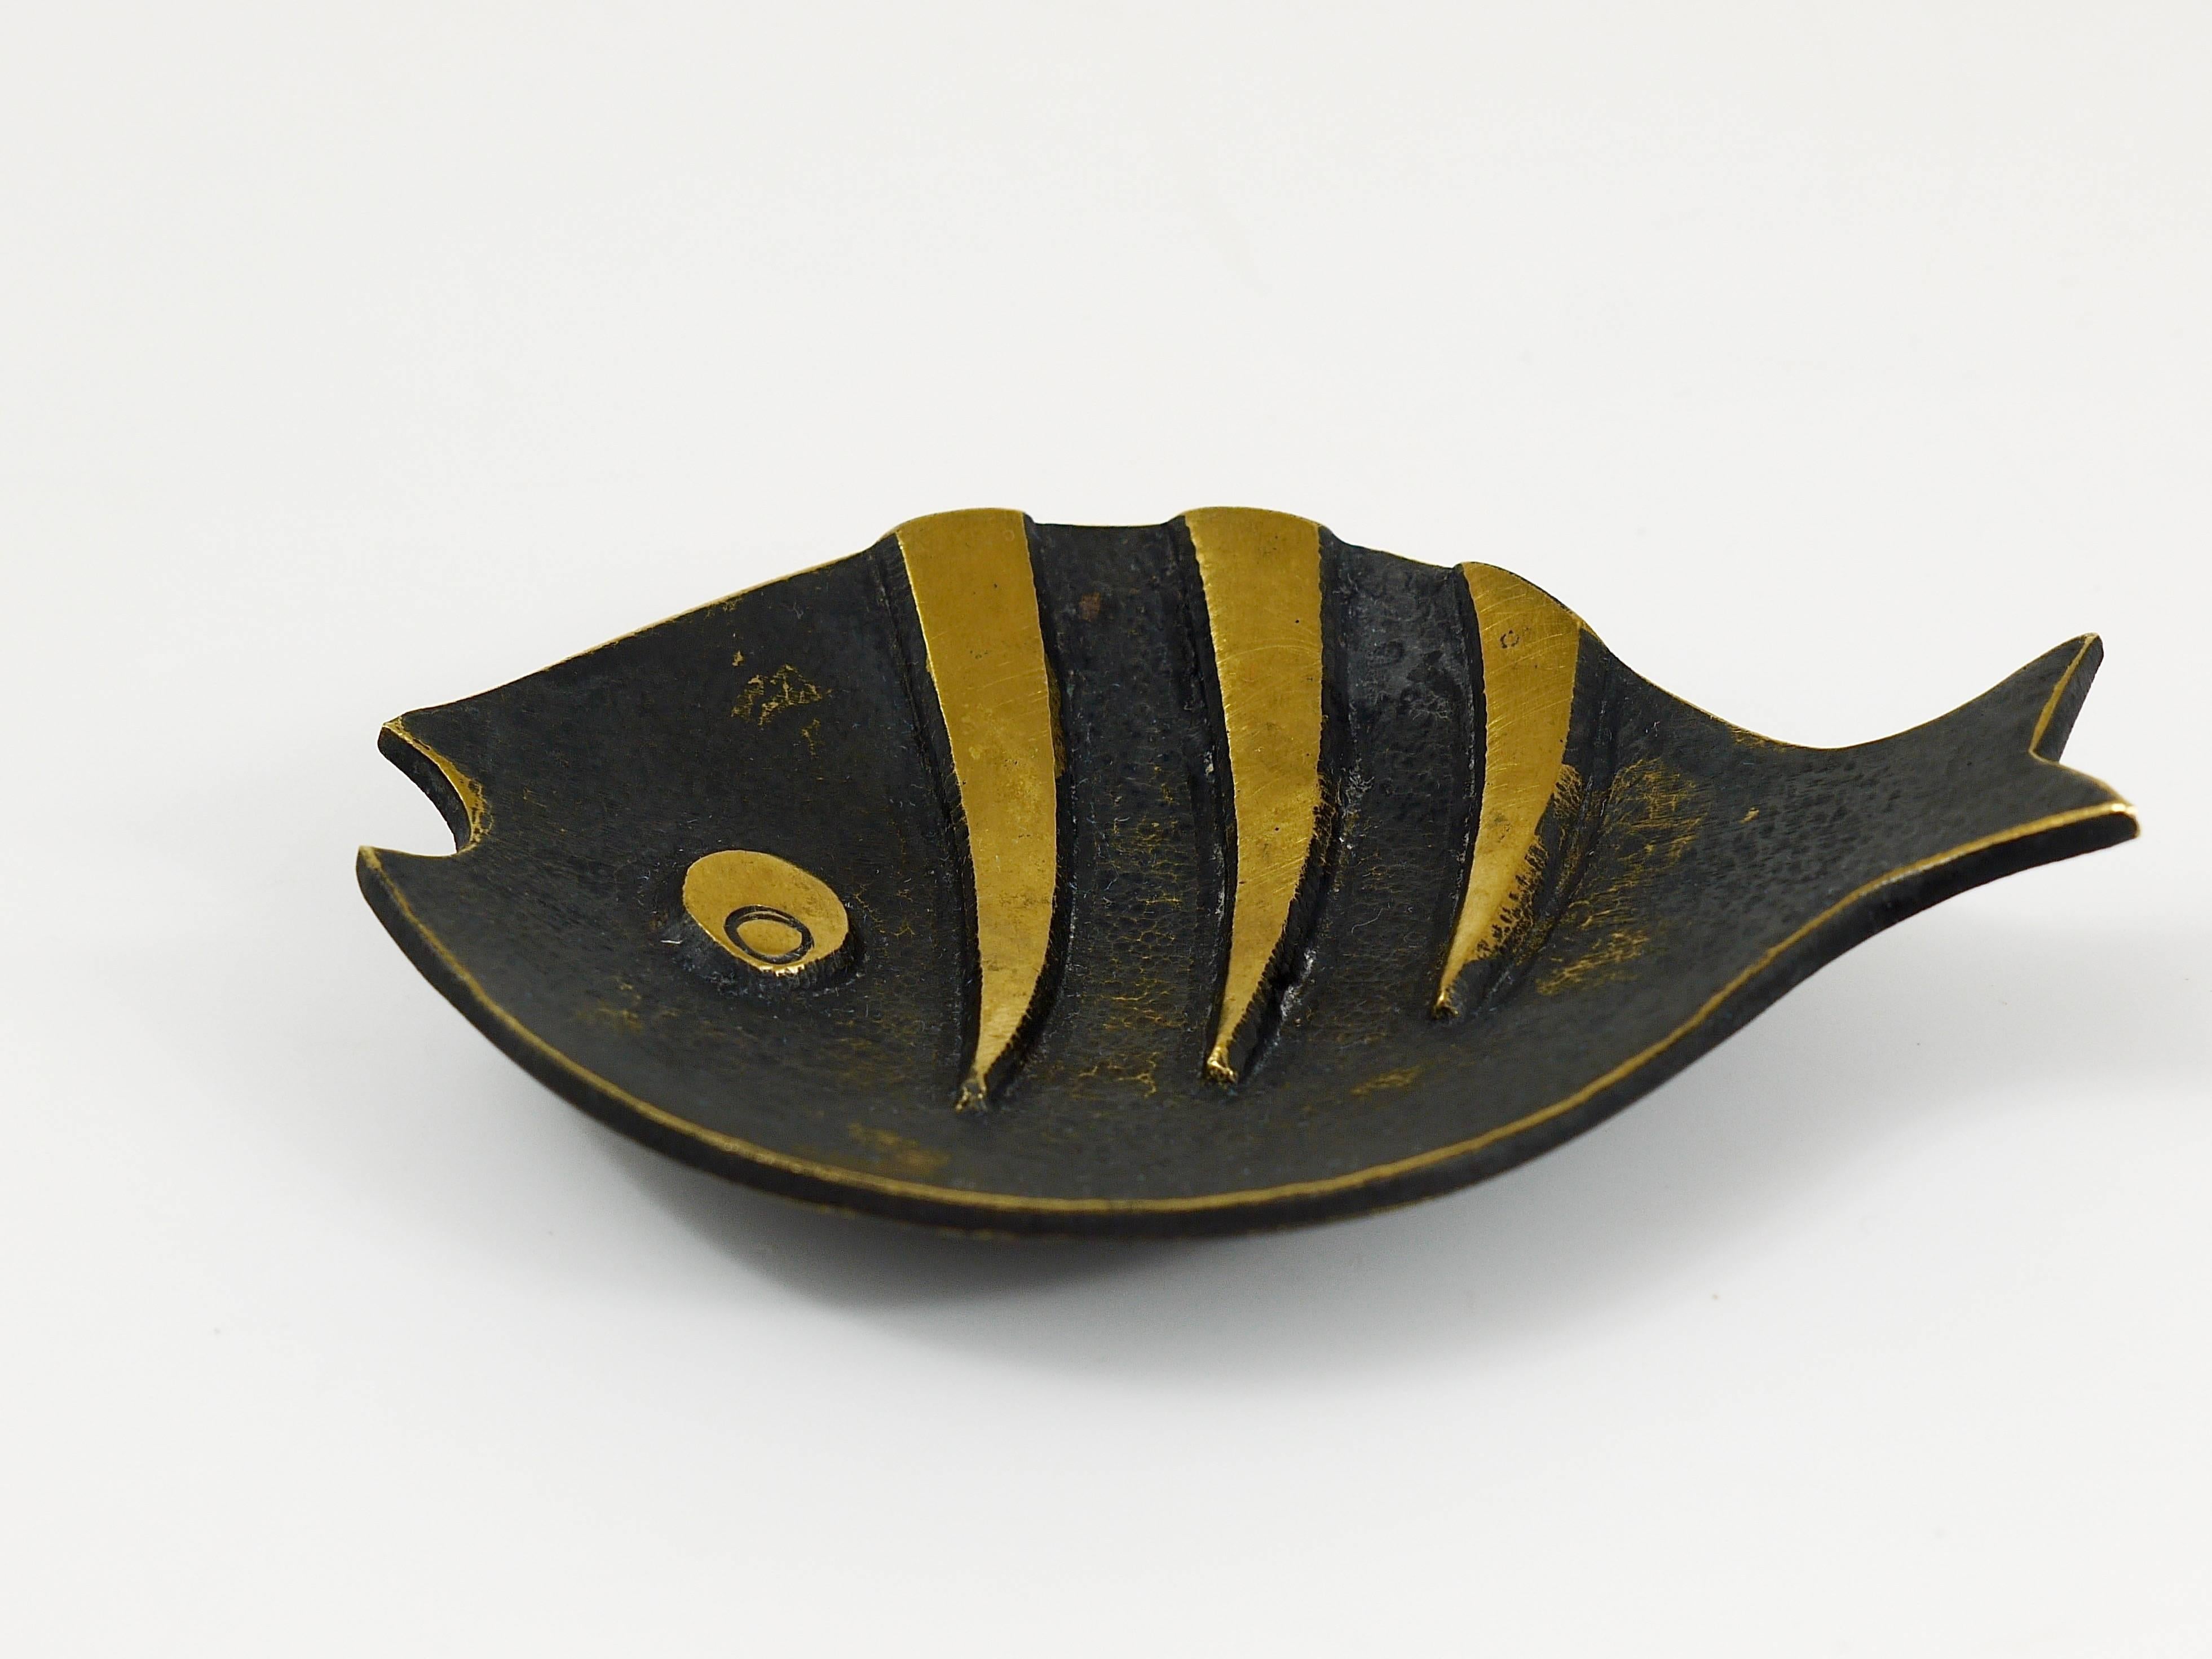 A charming modernist brass bowl or ashtray in the shape of a fish. A humorous design by Walter Bosse, executed by Hertha Baller Austria in the 1950s. Made of brass, in good condition with nice patina. Marked. Also suitable as a vide poche or pin